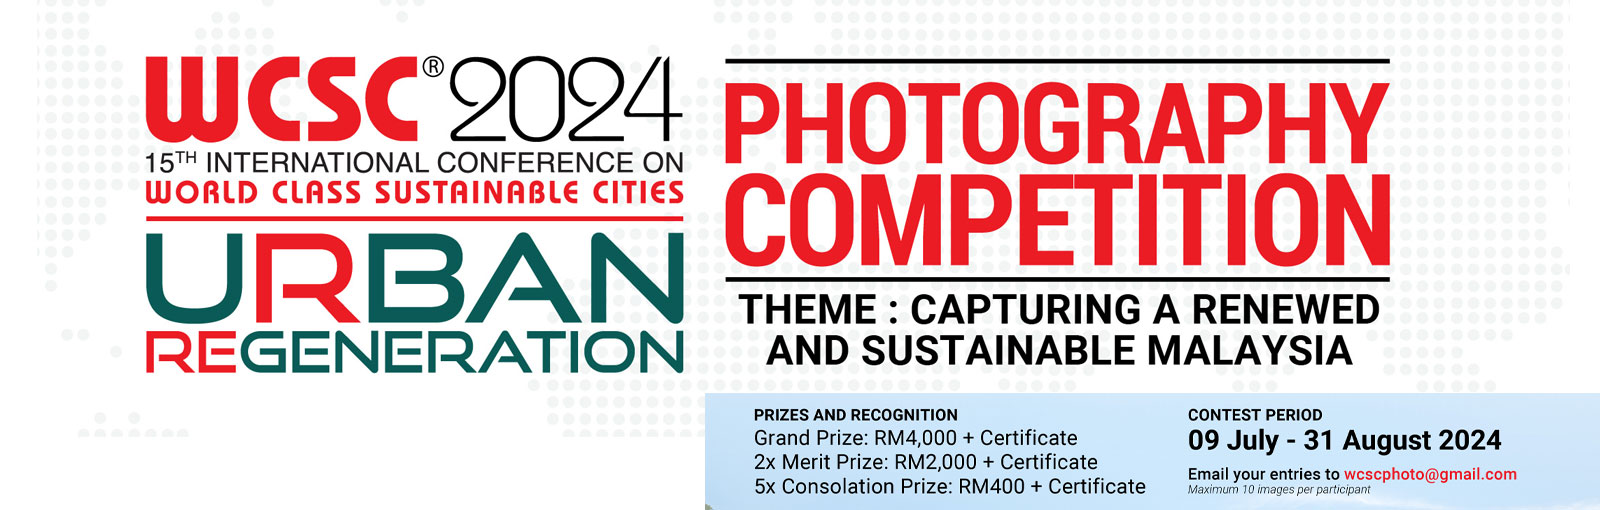 WCSC 2024 Photography Competition - Capturing A Renewed and Sustainable Malaysia